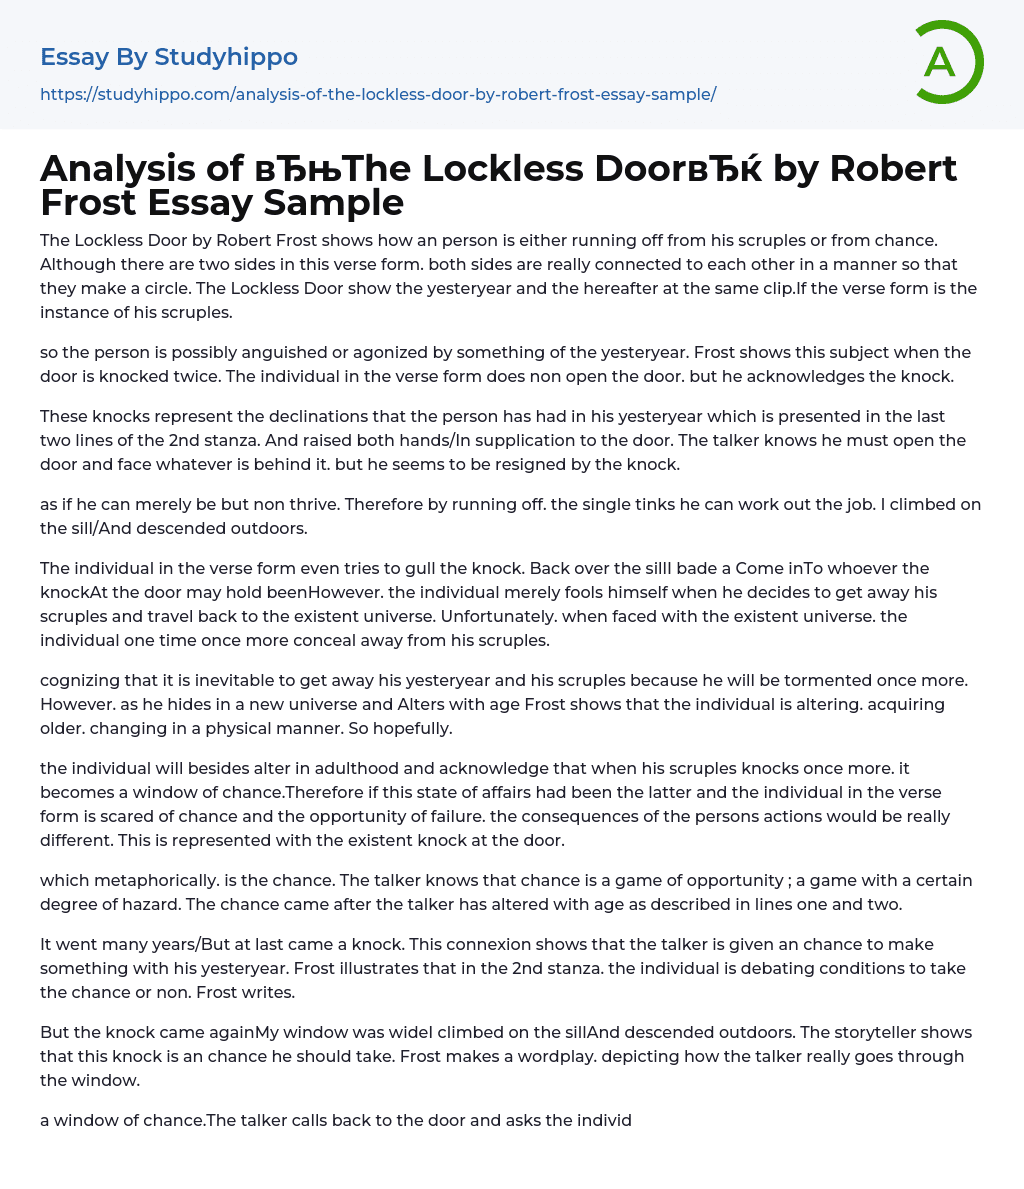 Analysis of “The Lockless Door” by Robert Frost Essay Sample